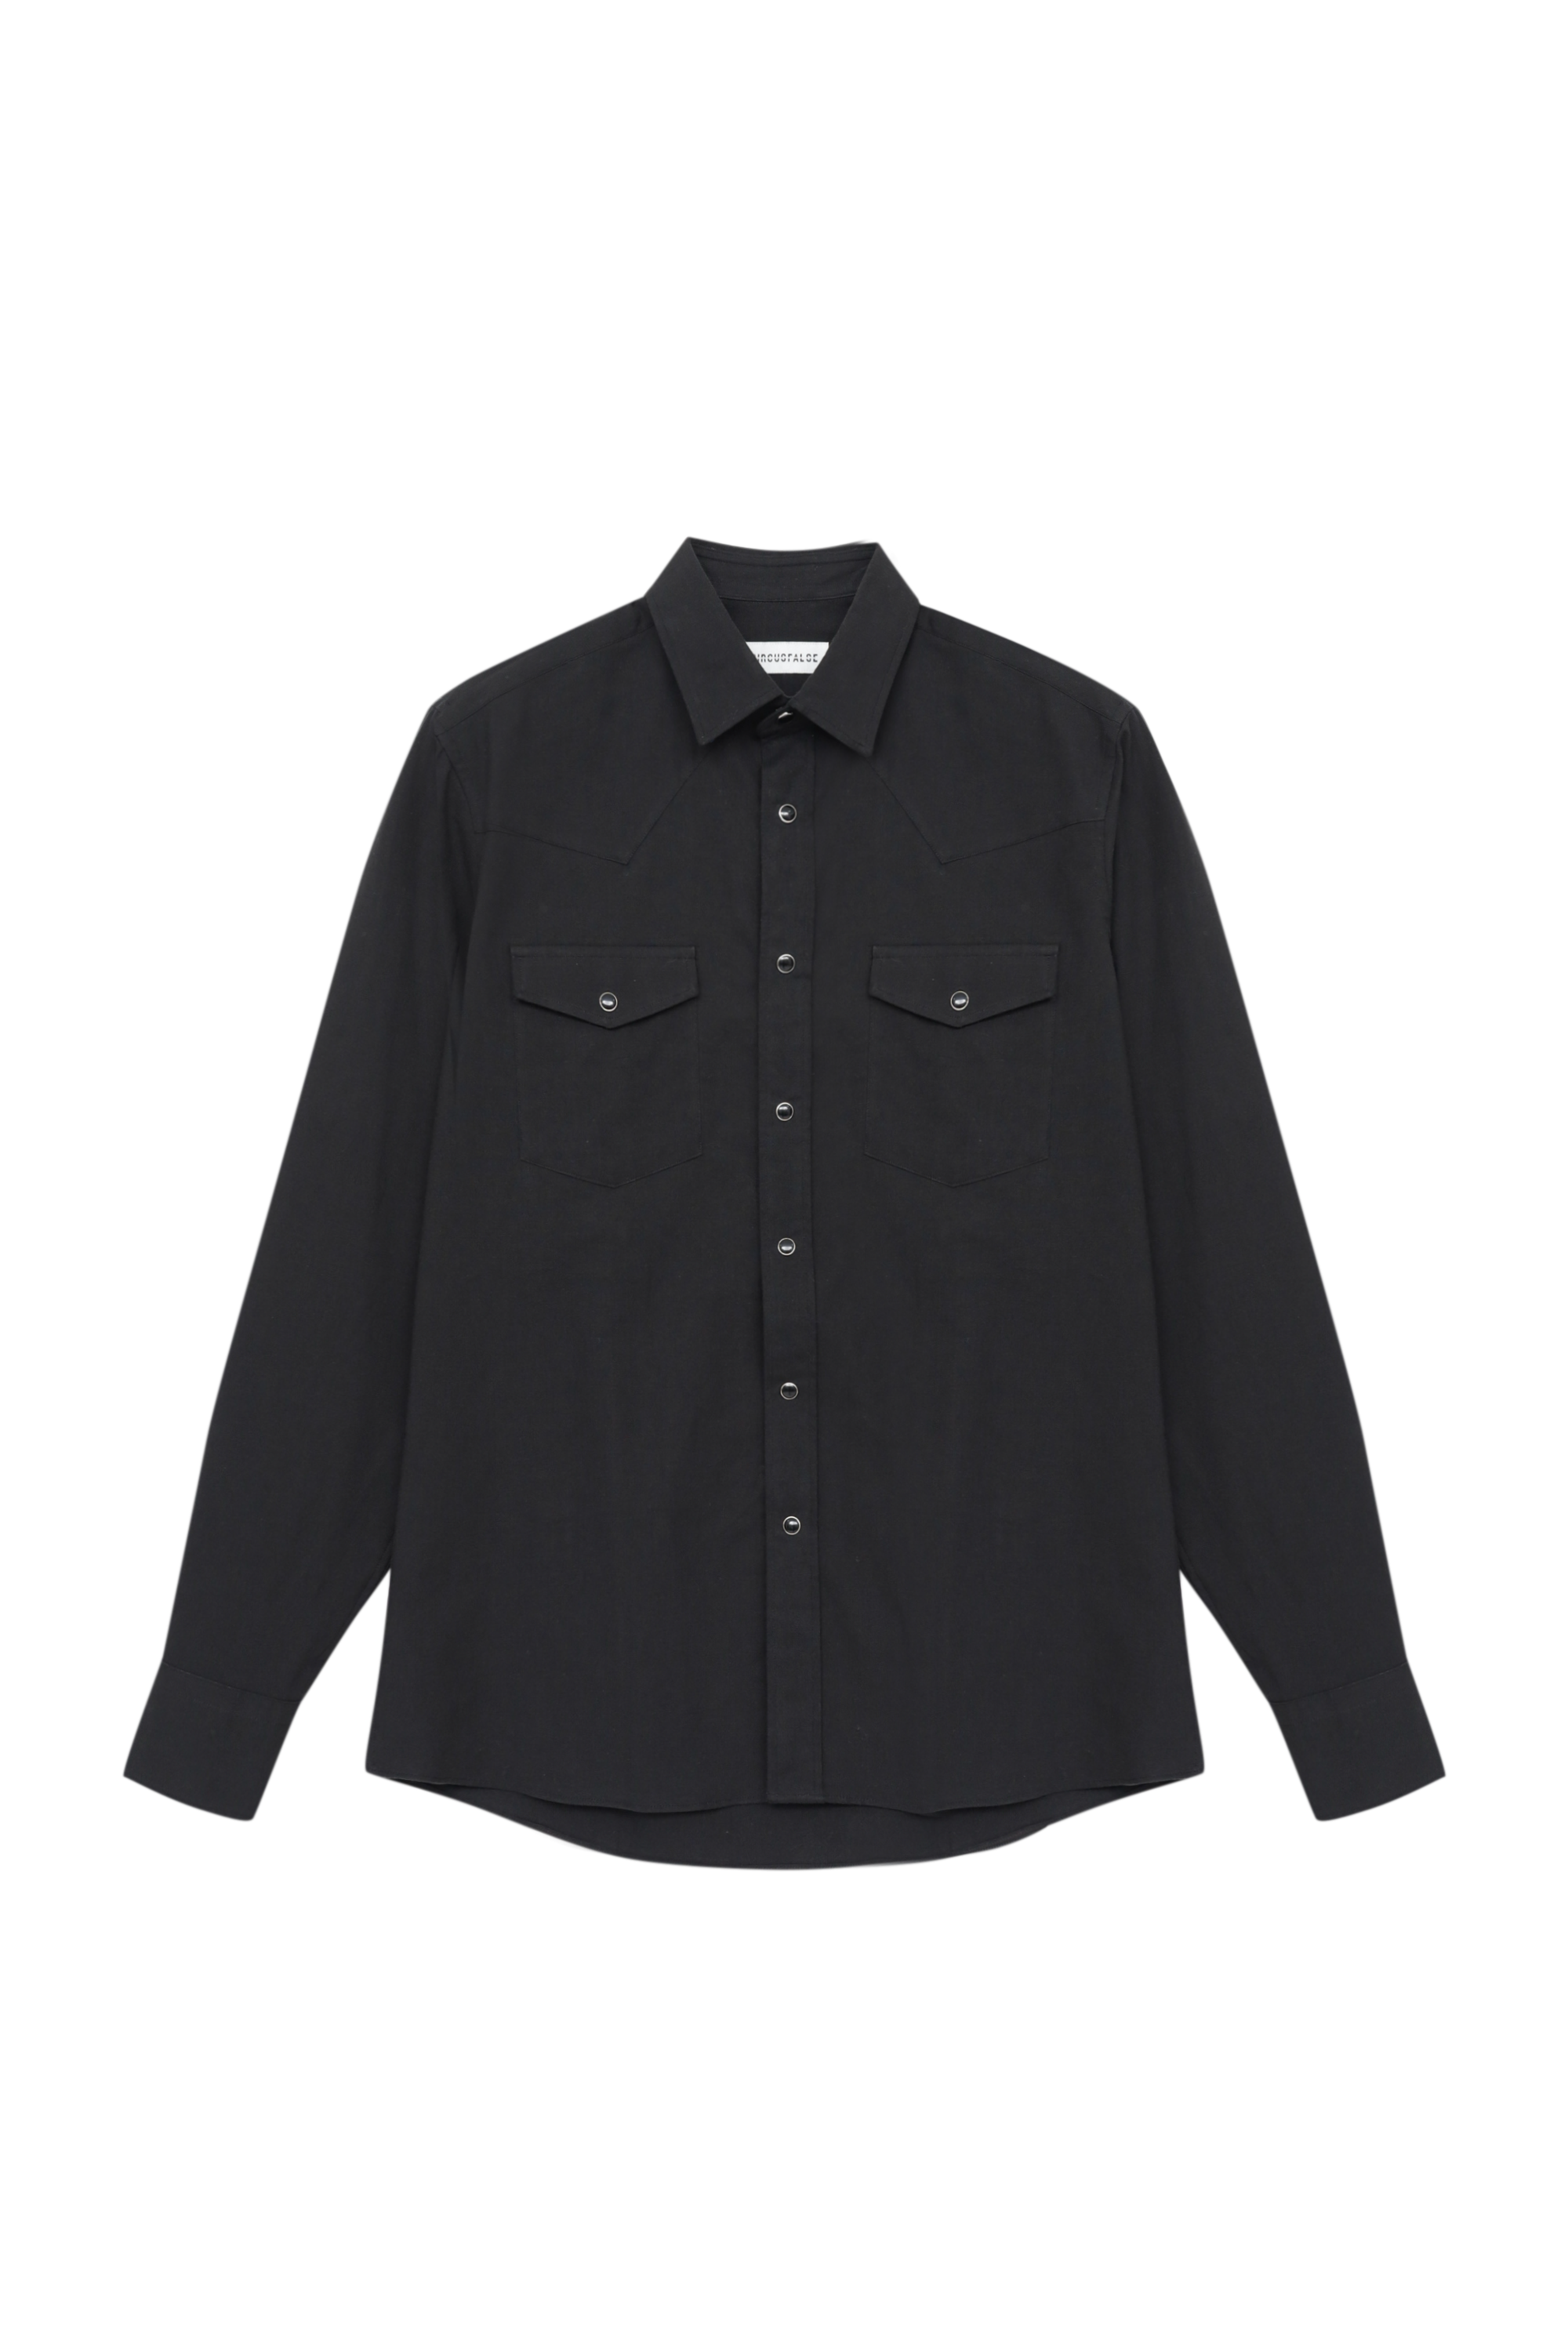 CIRCUSFALSE: WESTERN SHIRTS IN BLACK FLANNEL